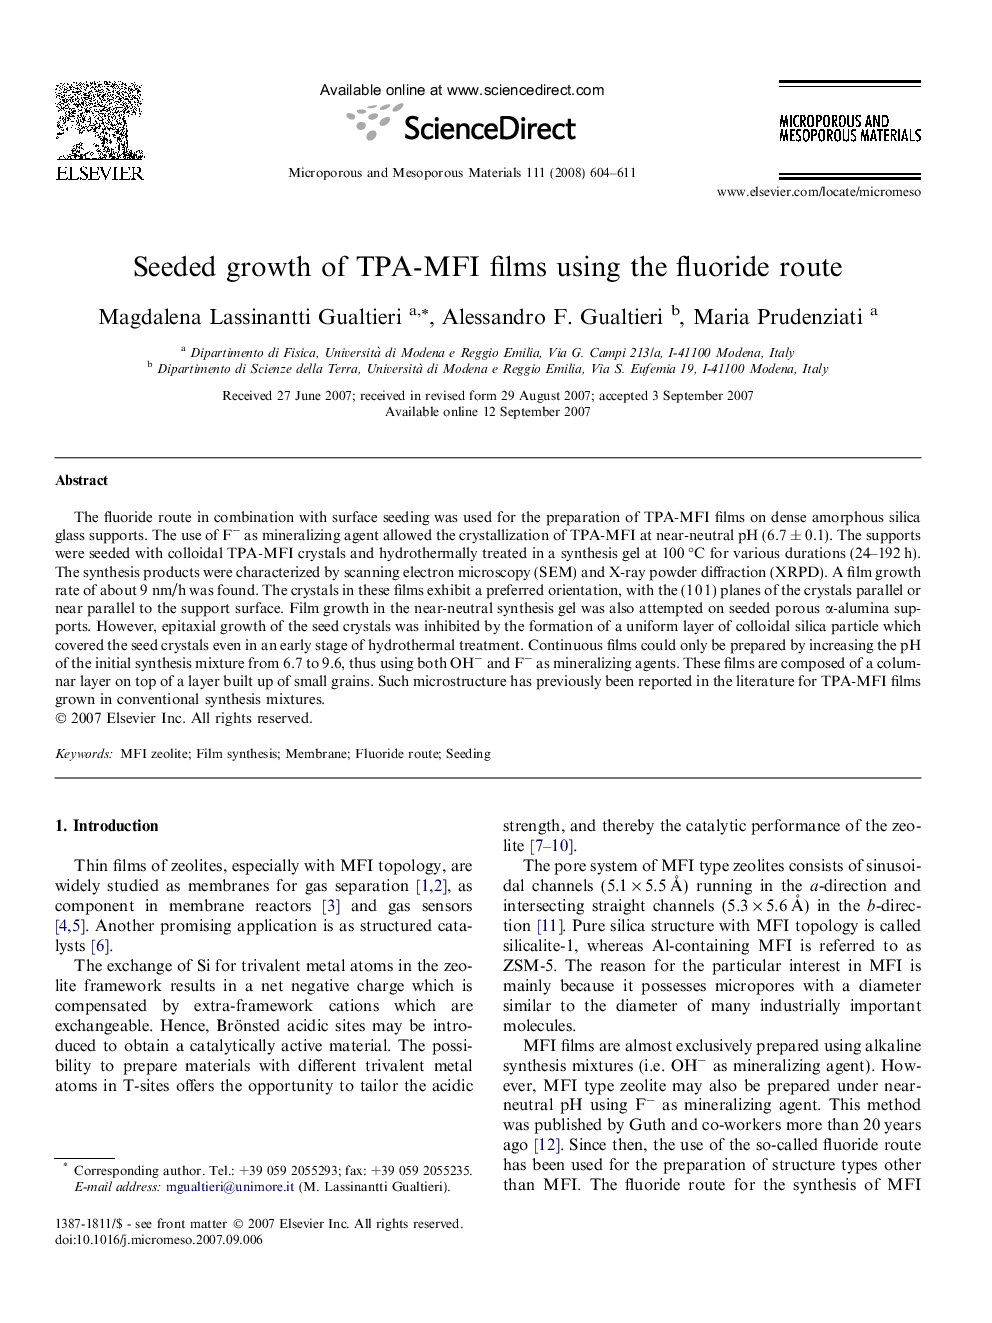 Seeded growth of TPA-MFI films using the fluoride route